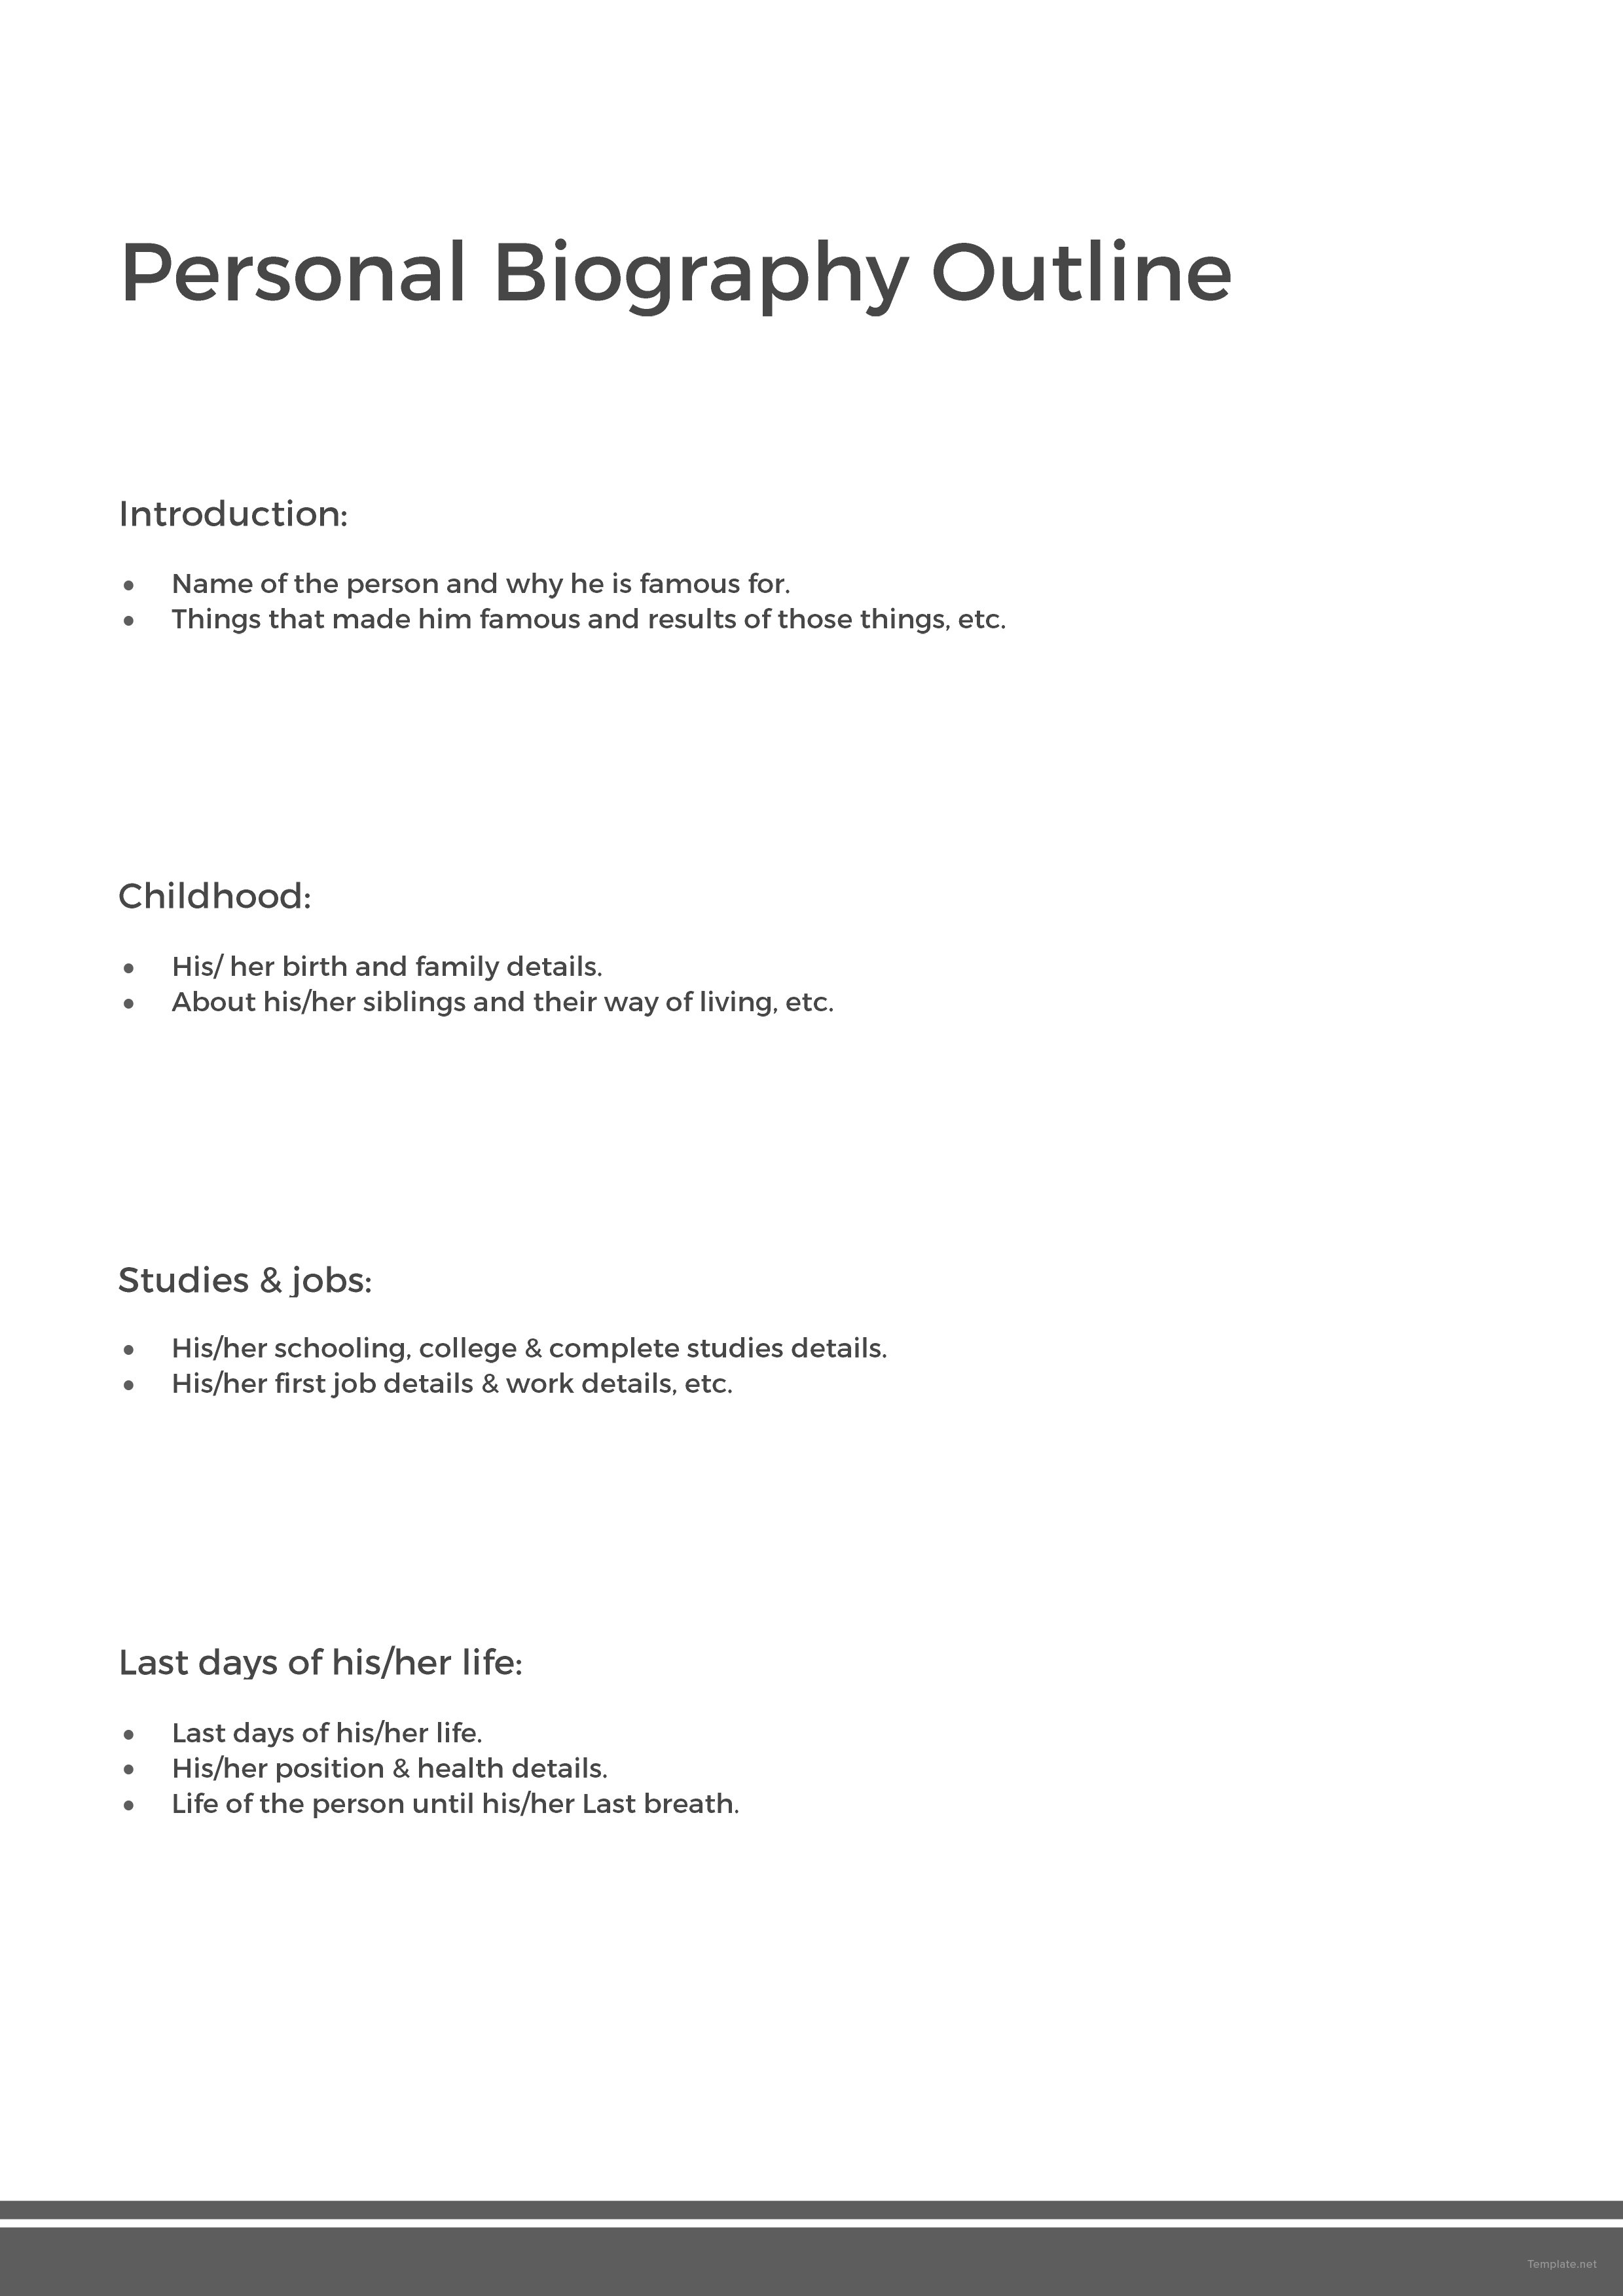 Personal Biography Outline Template in Microsoft Word